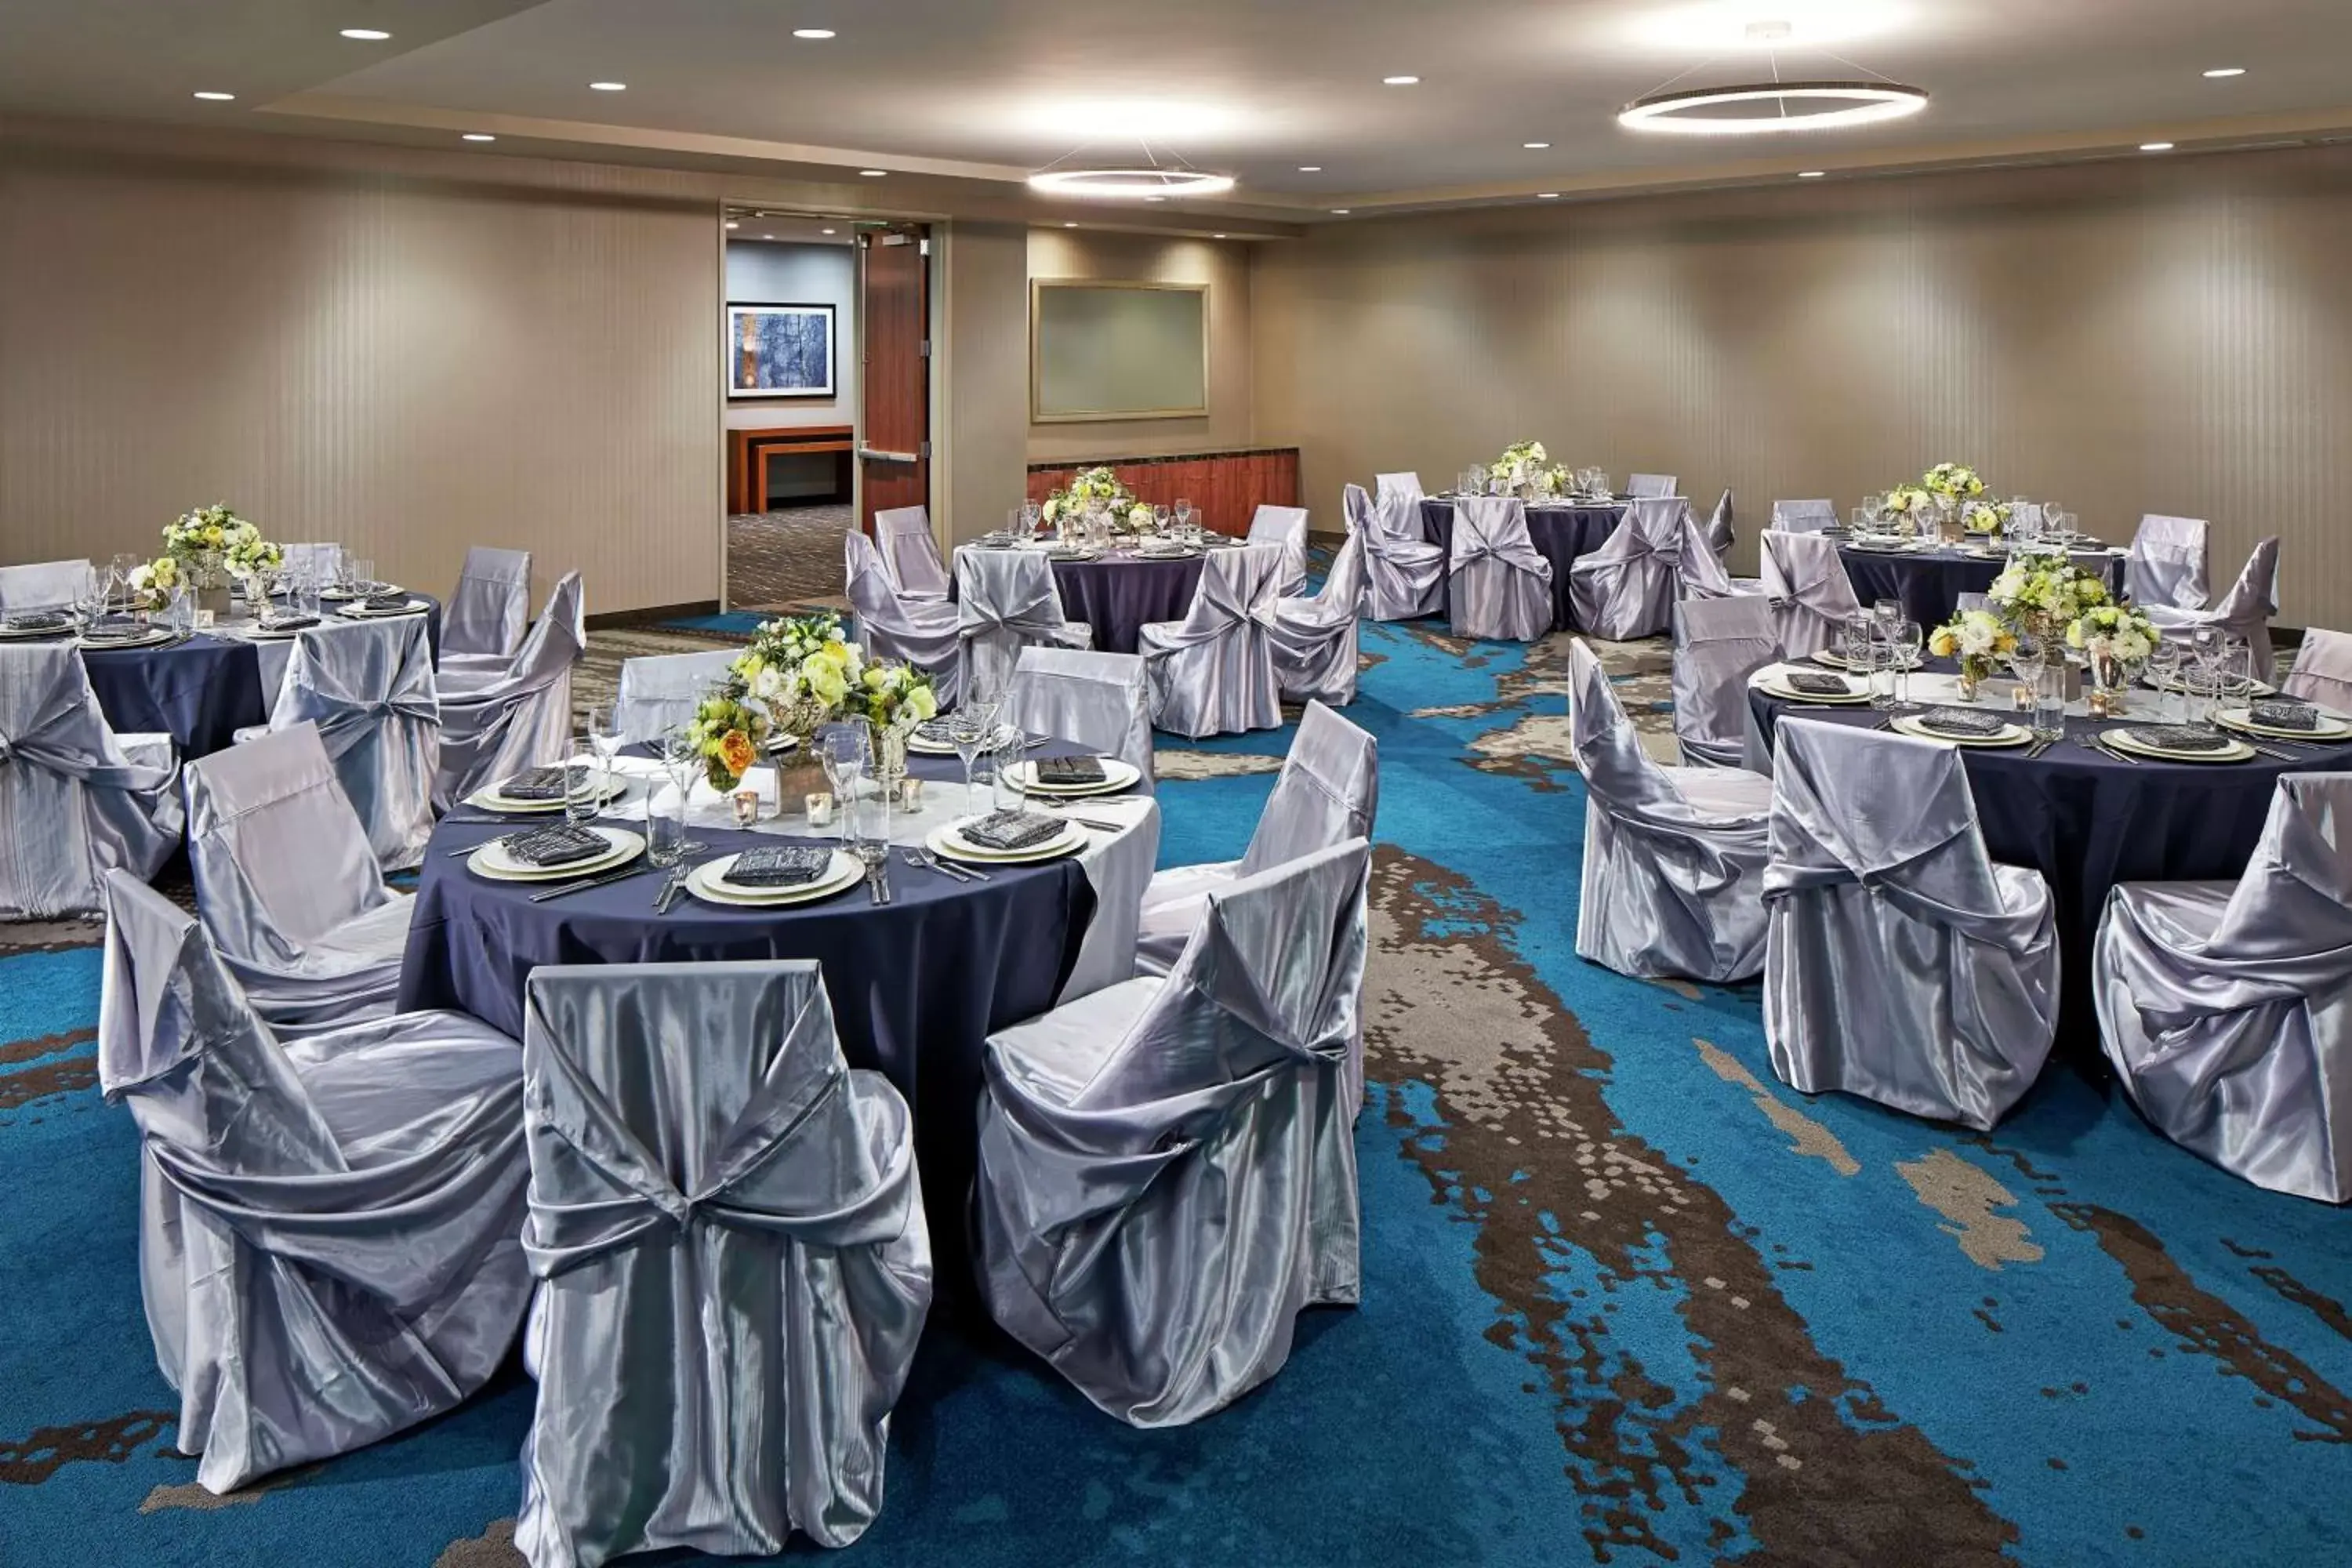 Meeting/conference room, Banquet Facilities in Hilton Garden Inn San Diego Downtown/Bayside, CA